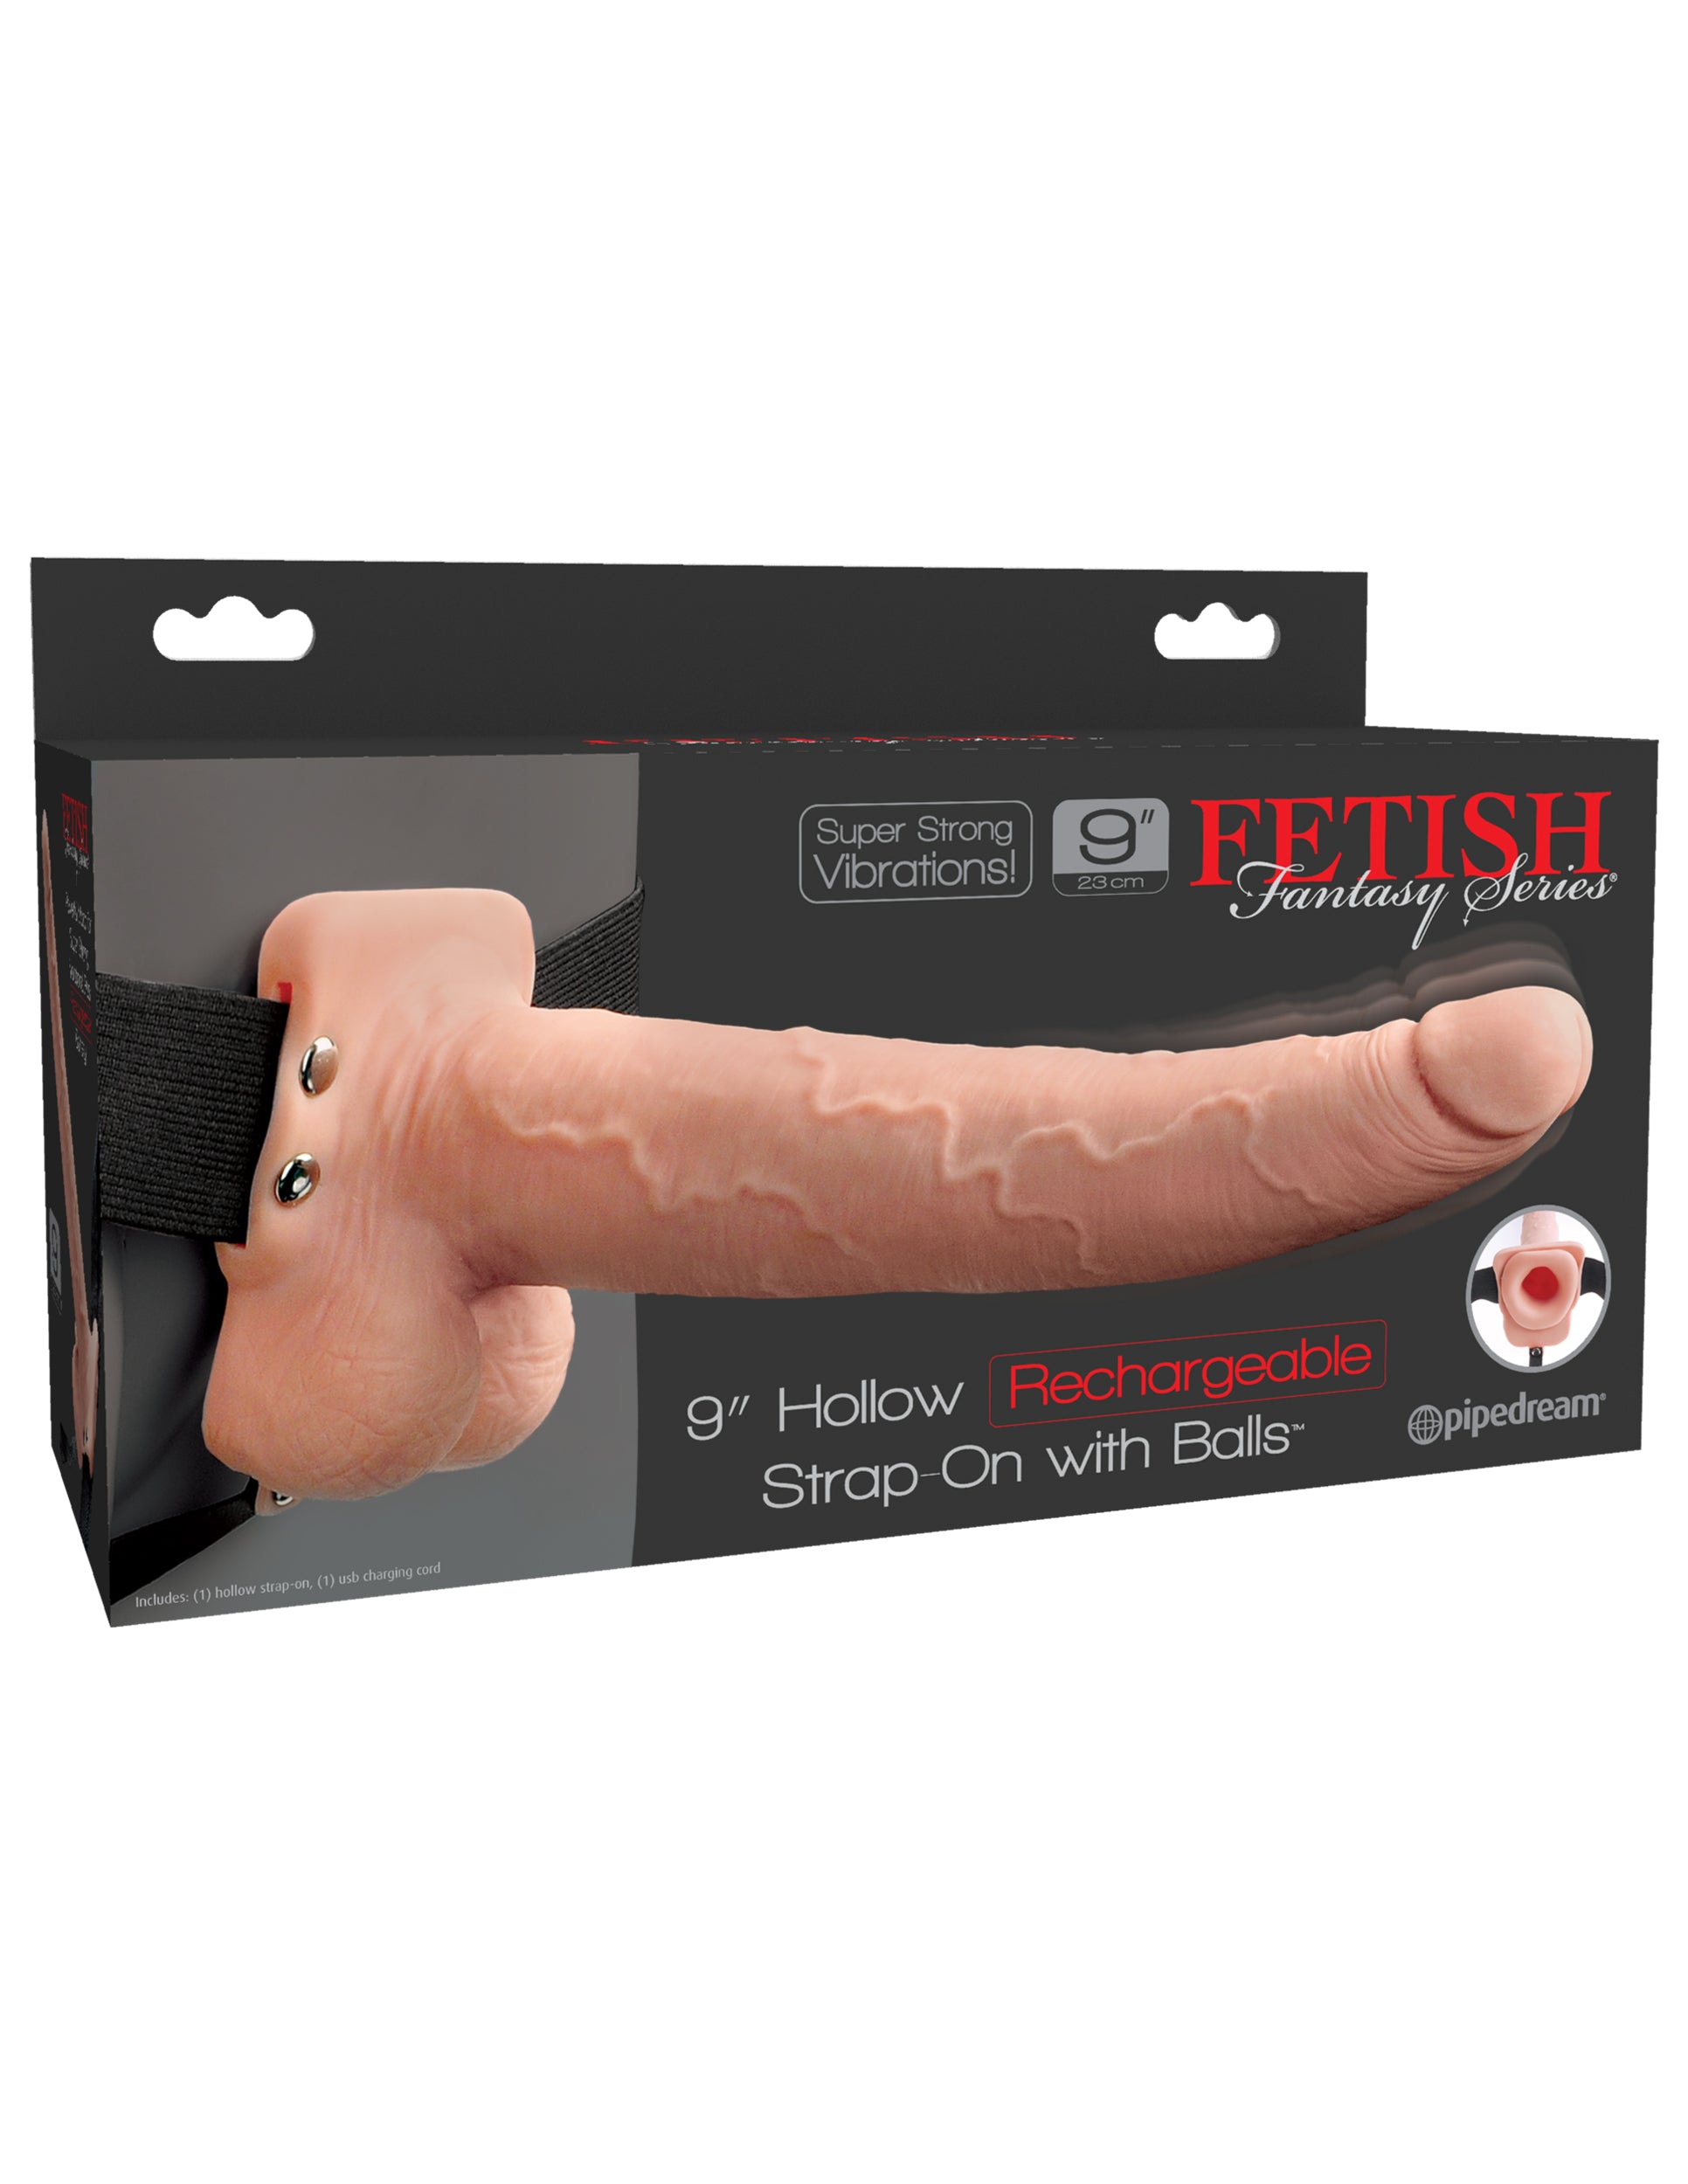 Fetish Fantasy Series 9" Hollow Rechargeable Strap-on With Balls - Flesh PD3392-21